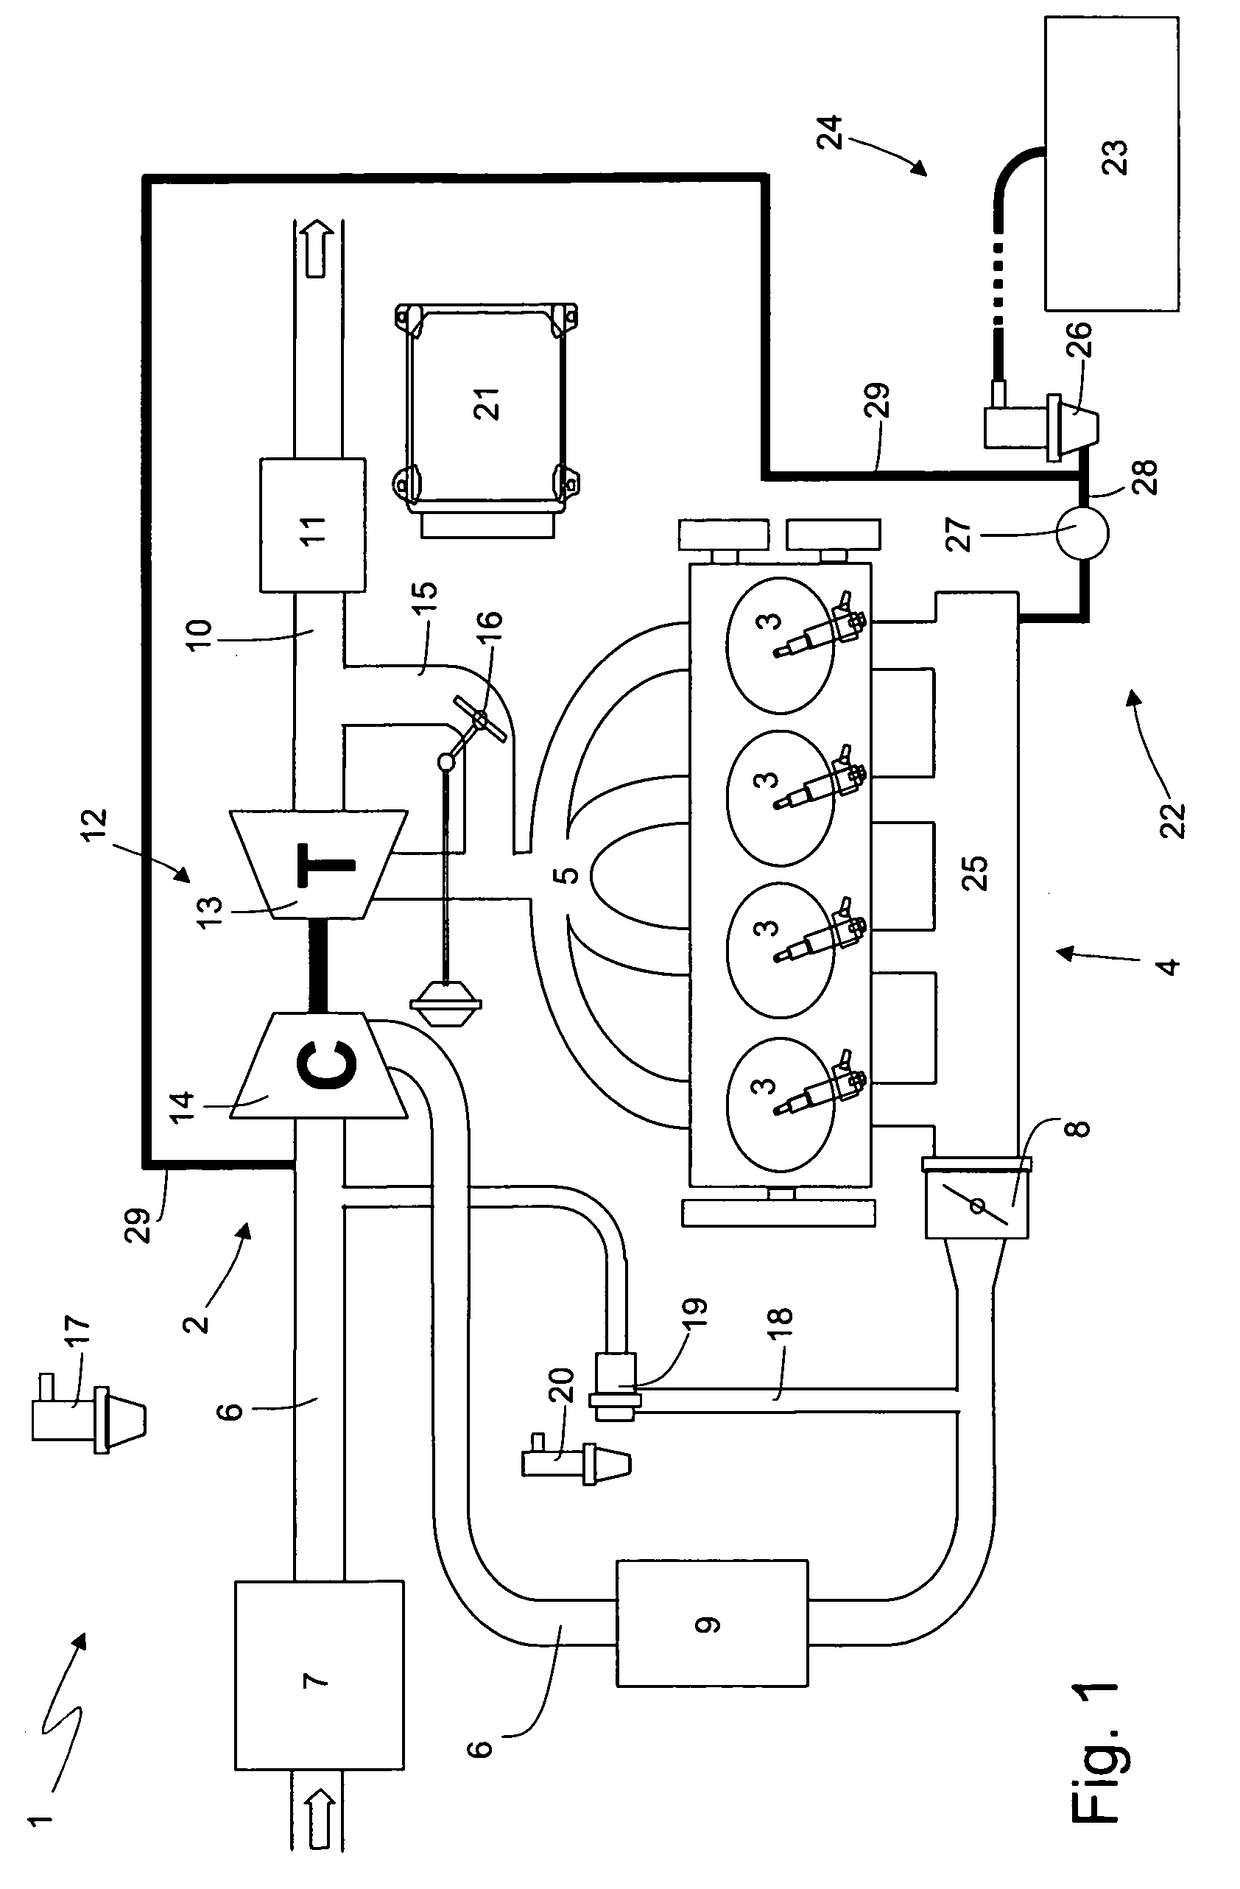 Intake manifold with integrated canister circuit for a supercharged internal combustion engine